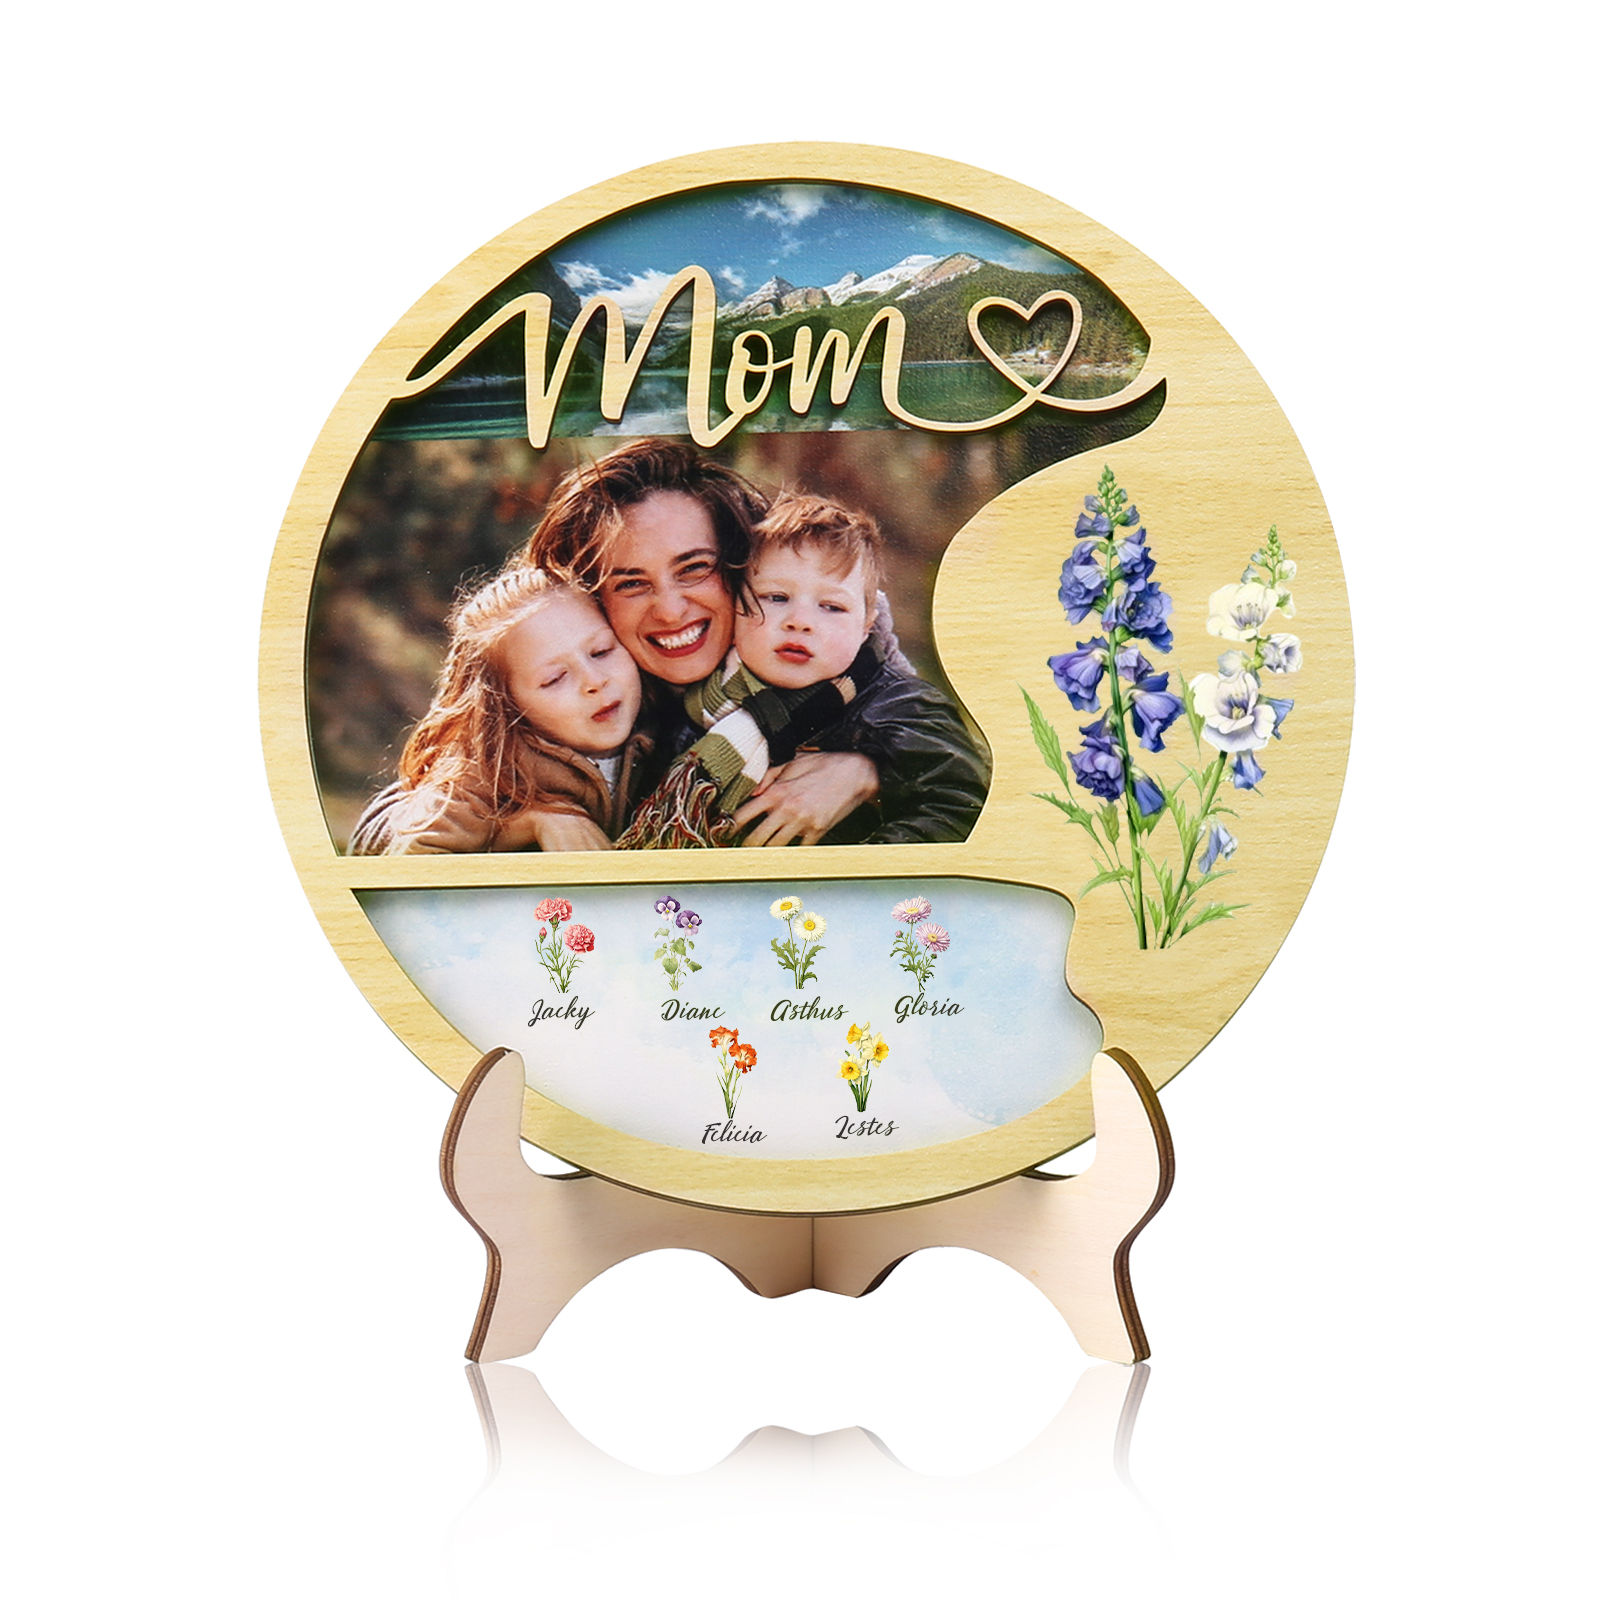 6 Names - Customized Photo Birthday Flowers and Text Wooden Ornaments for Mom/Grandma